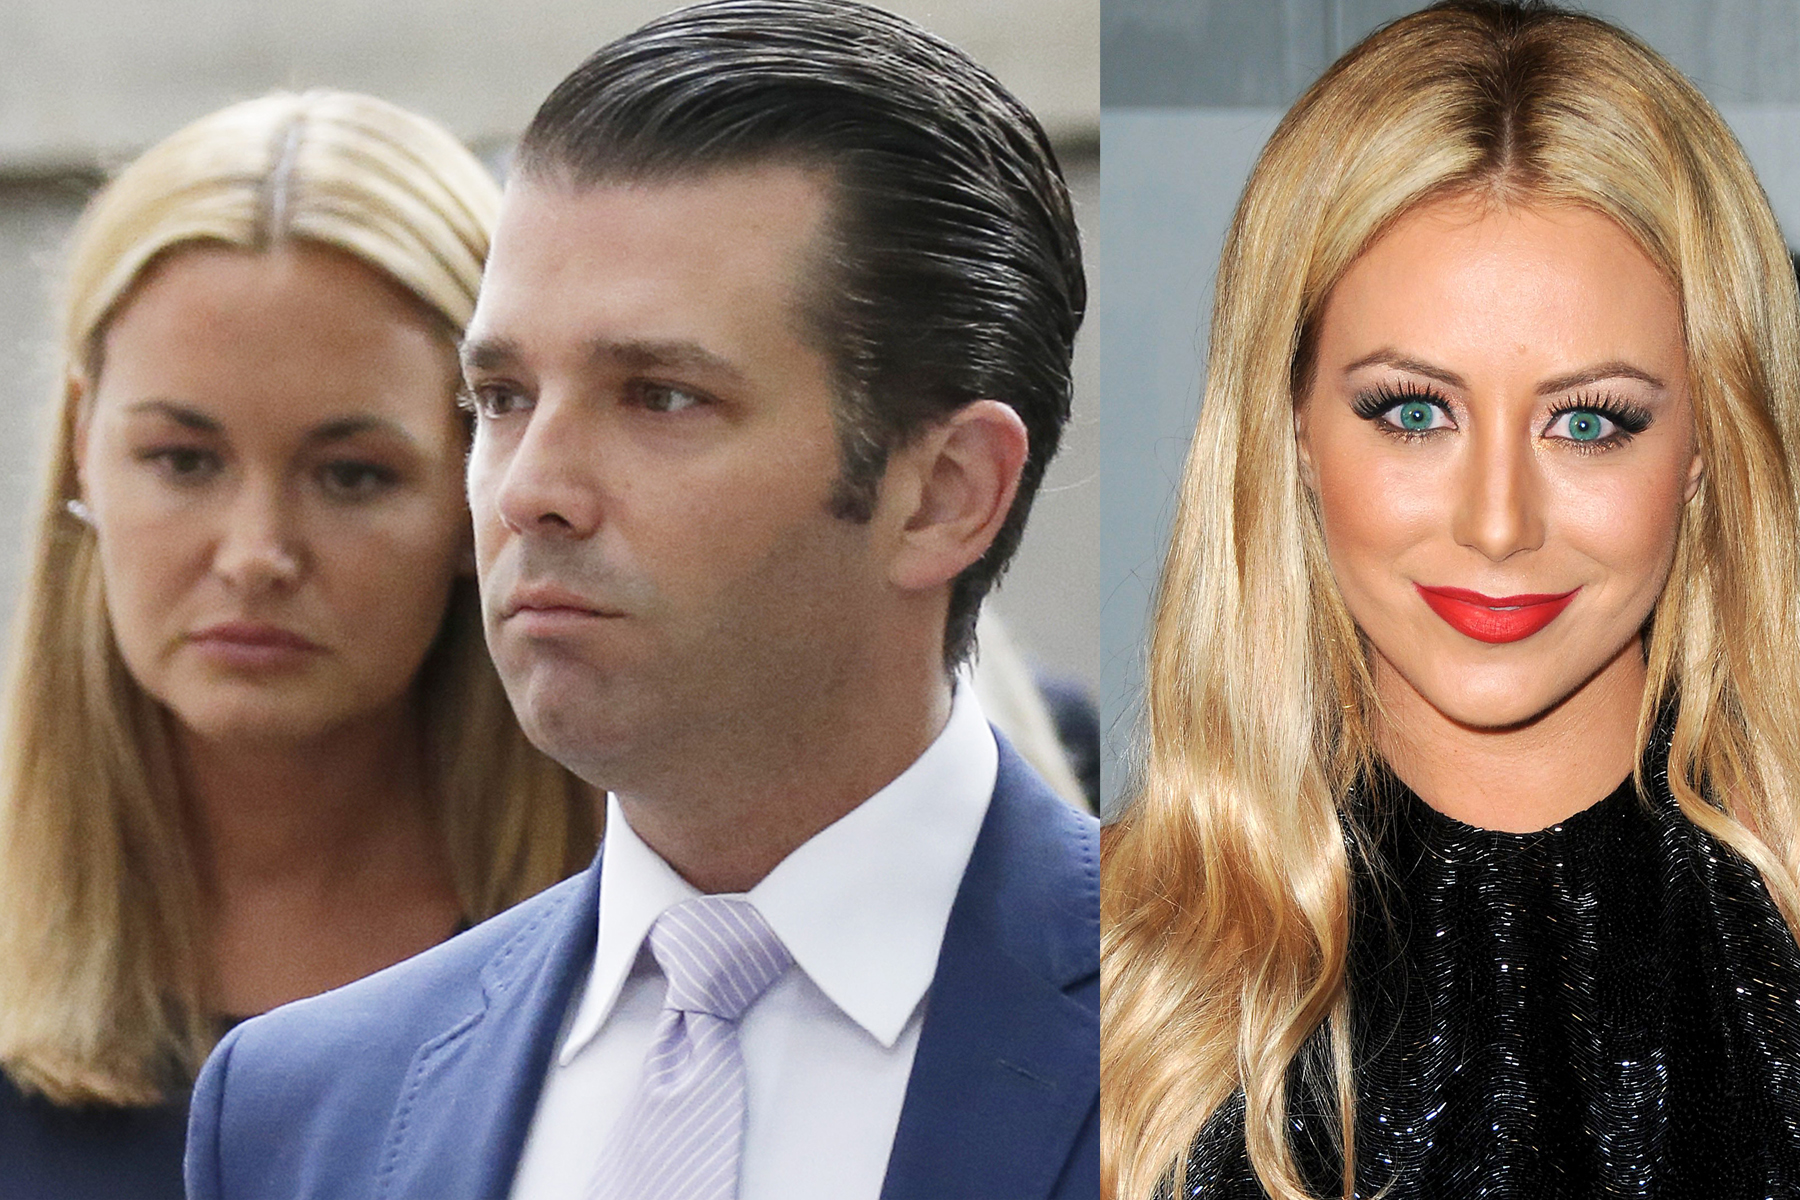 Ant Farm Porn Captions - Music star shares new details about what happened with Donald Trump Jr.,  more stars who've violated a partner's trust | Gallery | Wonderwall.com